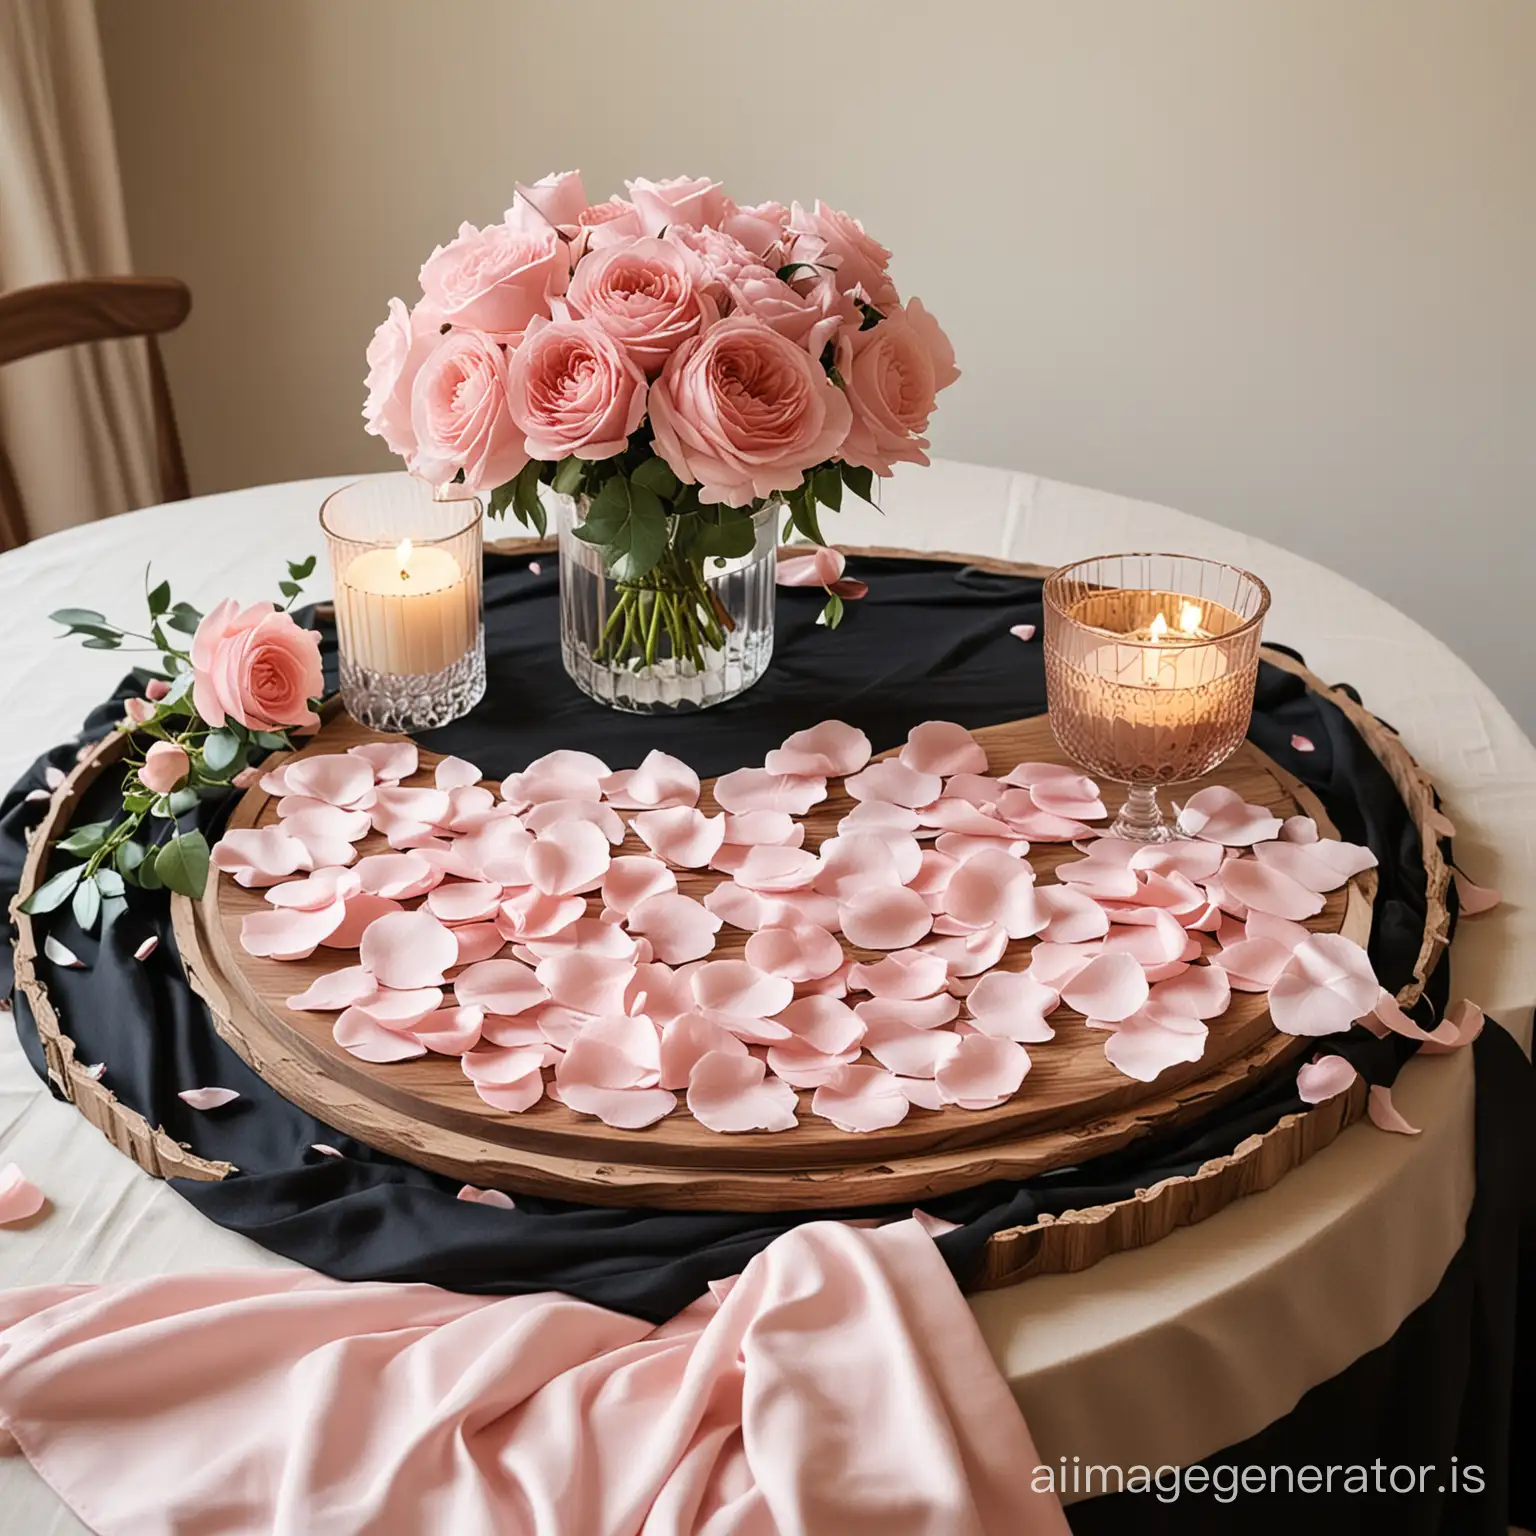 a cocktail table with a black tablecloth tied with a pale blush pink sash and a circular wooden tray with shades of pink rose petals is setting on the table as a simple and romantic centerpiece